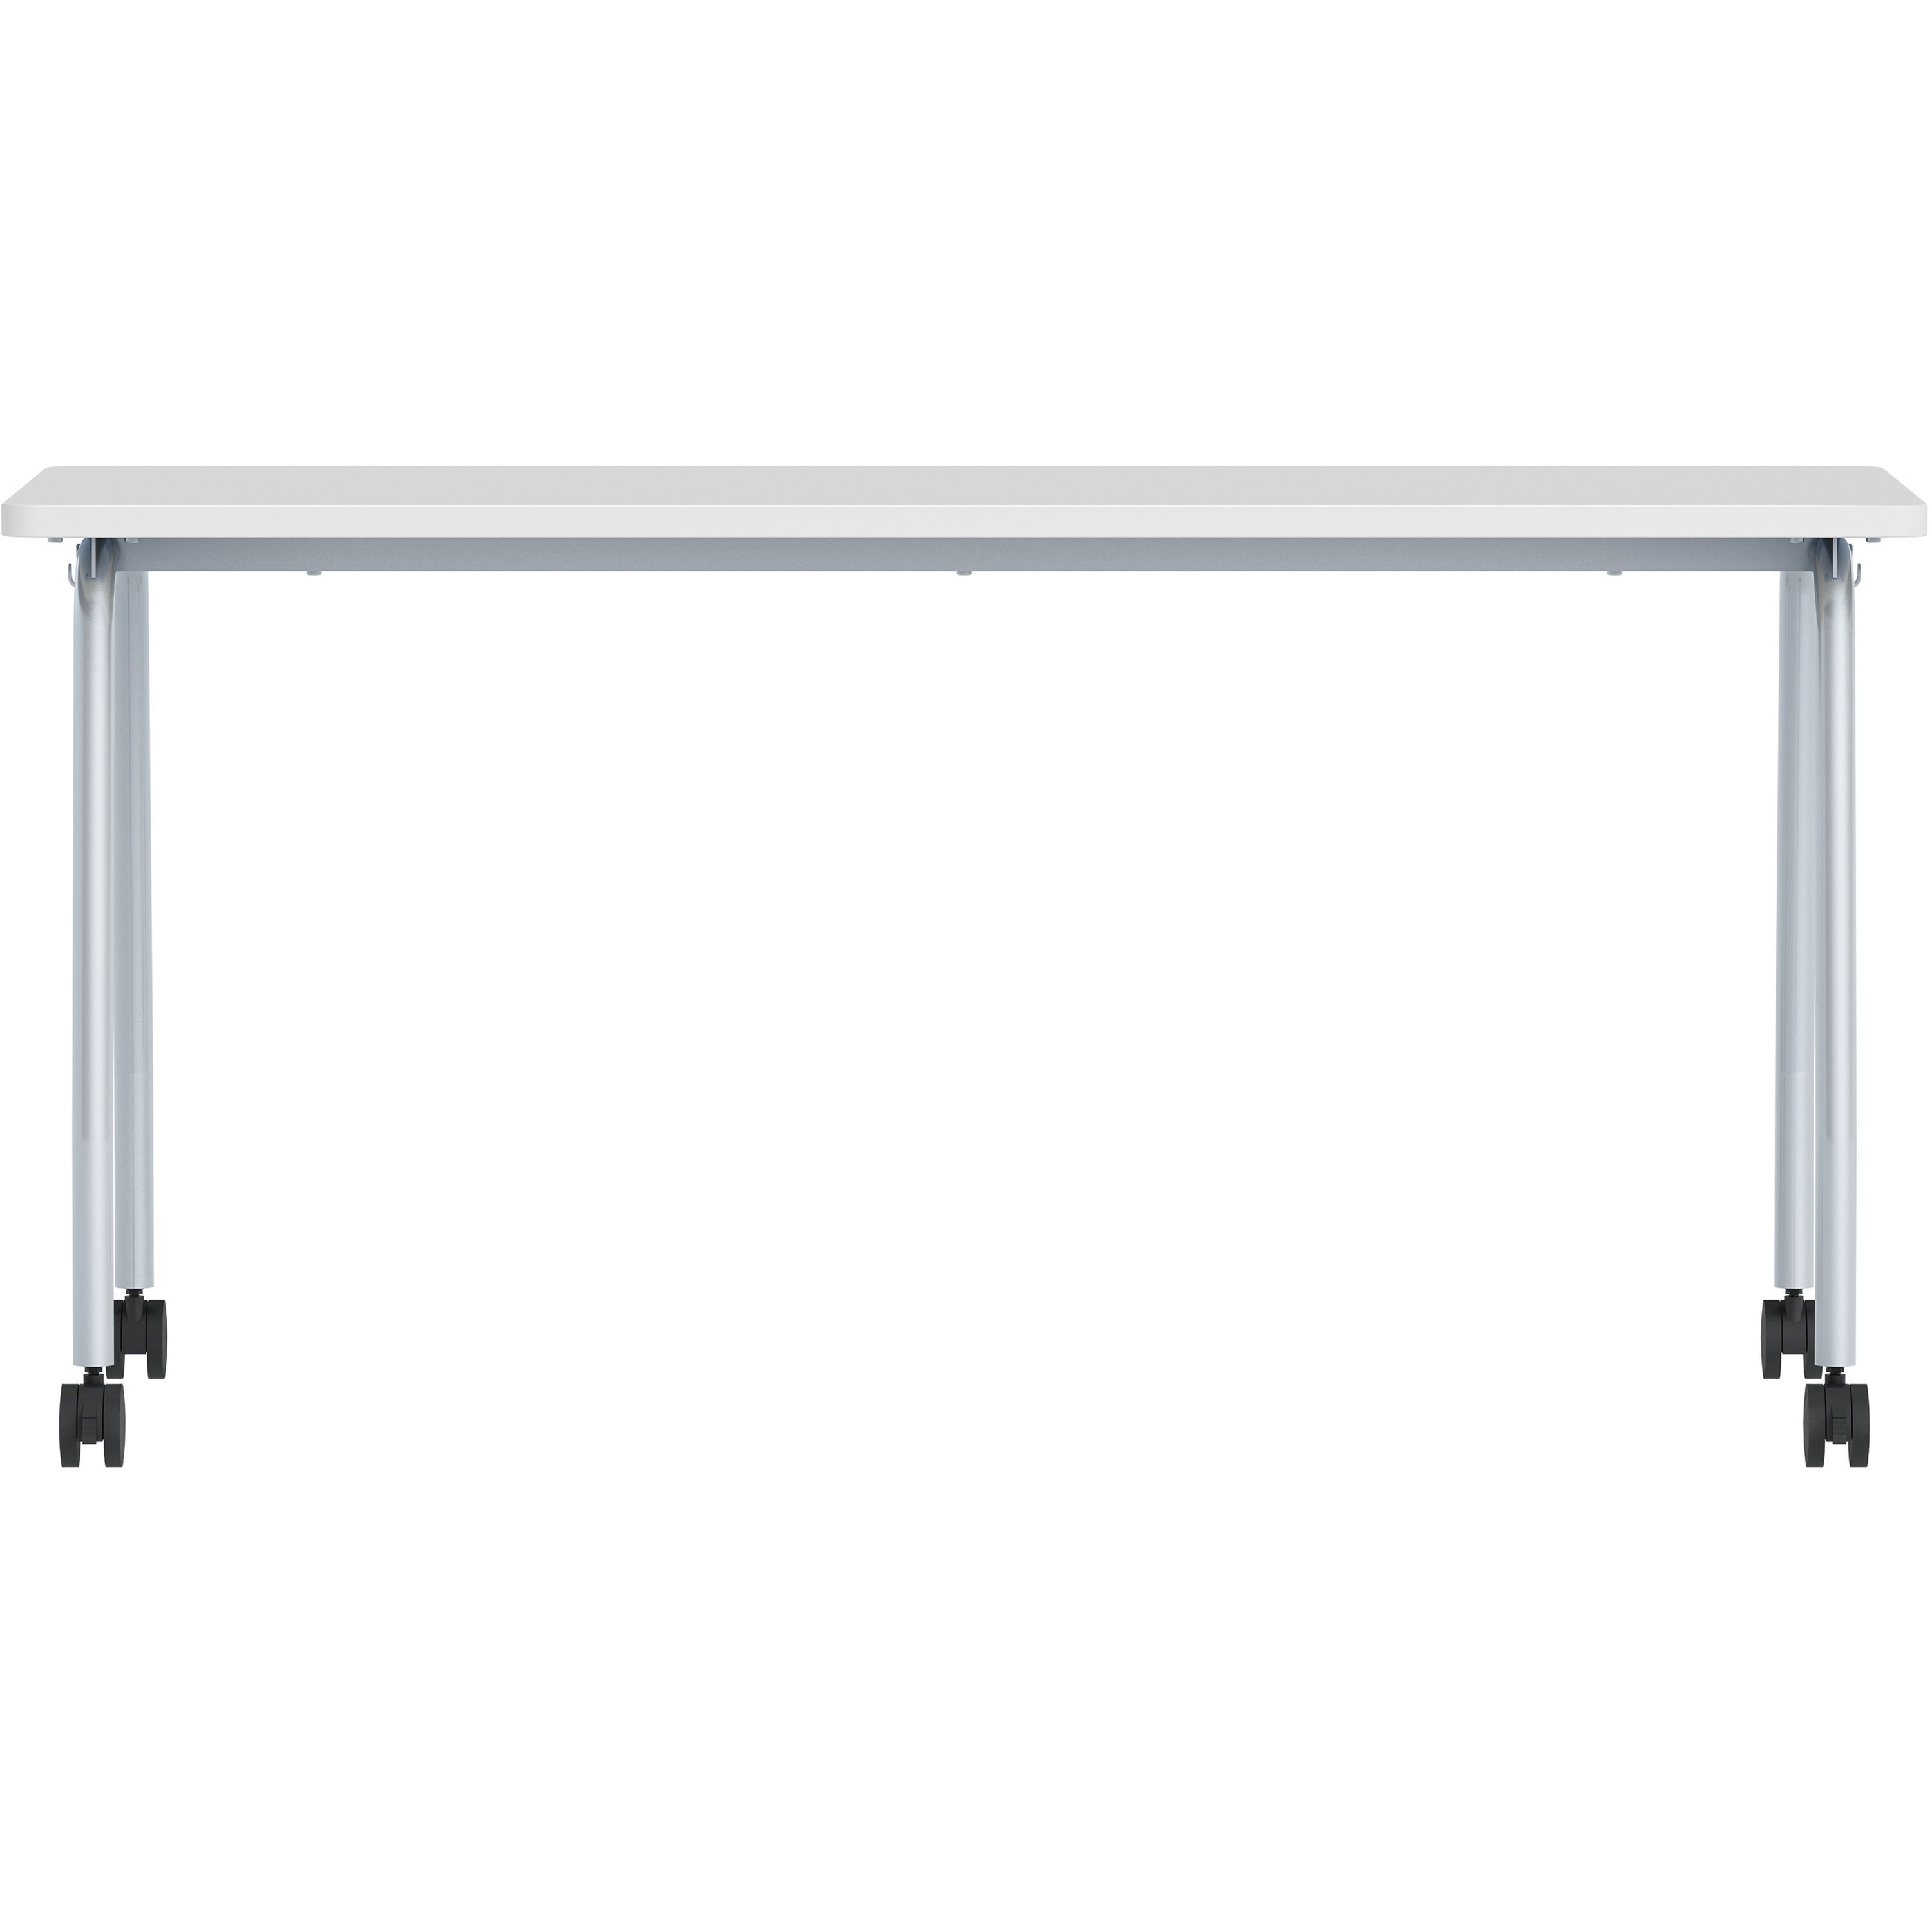 lorell-training-table-for-table-toplaminated-top-300-lb-capacity-2950-table-top-length-x-2363-table-top-width-x-1-table-top-thickness-59-height-assembly-required-gray-particleboard-top-material-1-each_llr60848 - 3